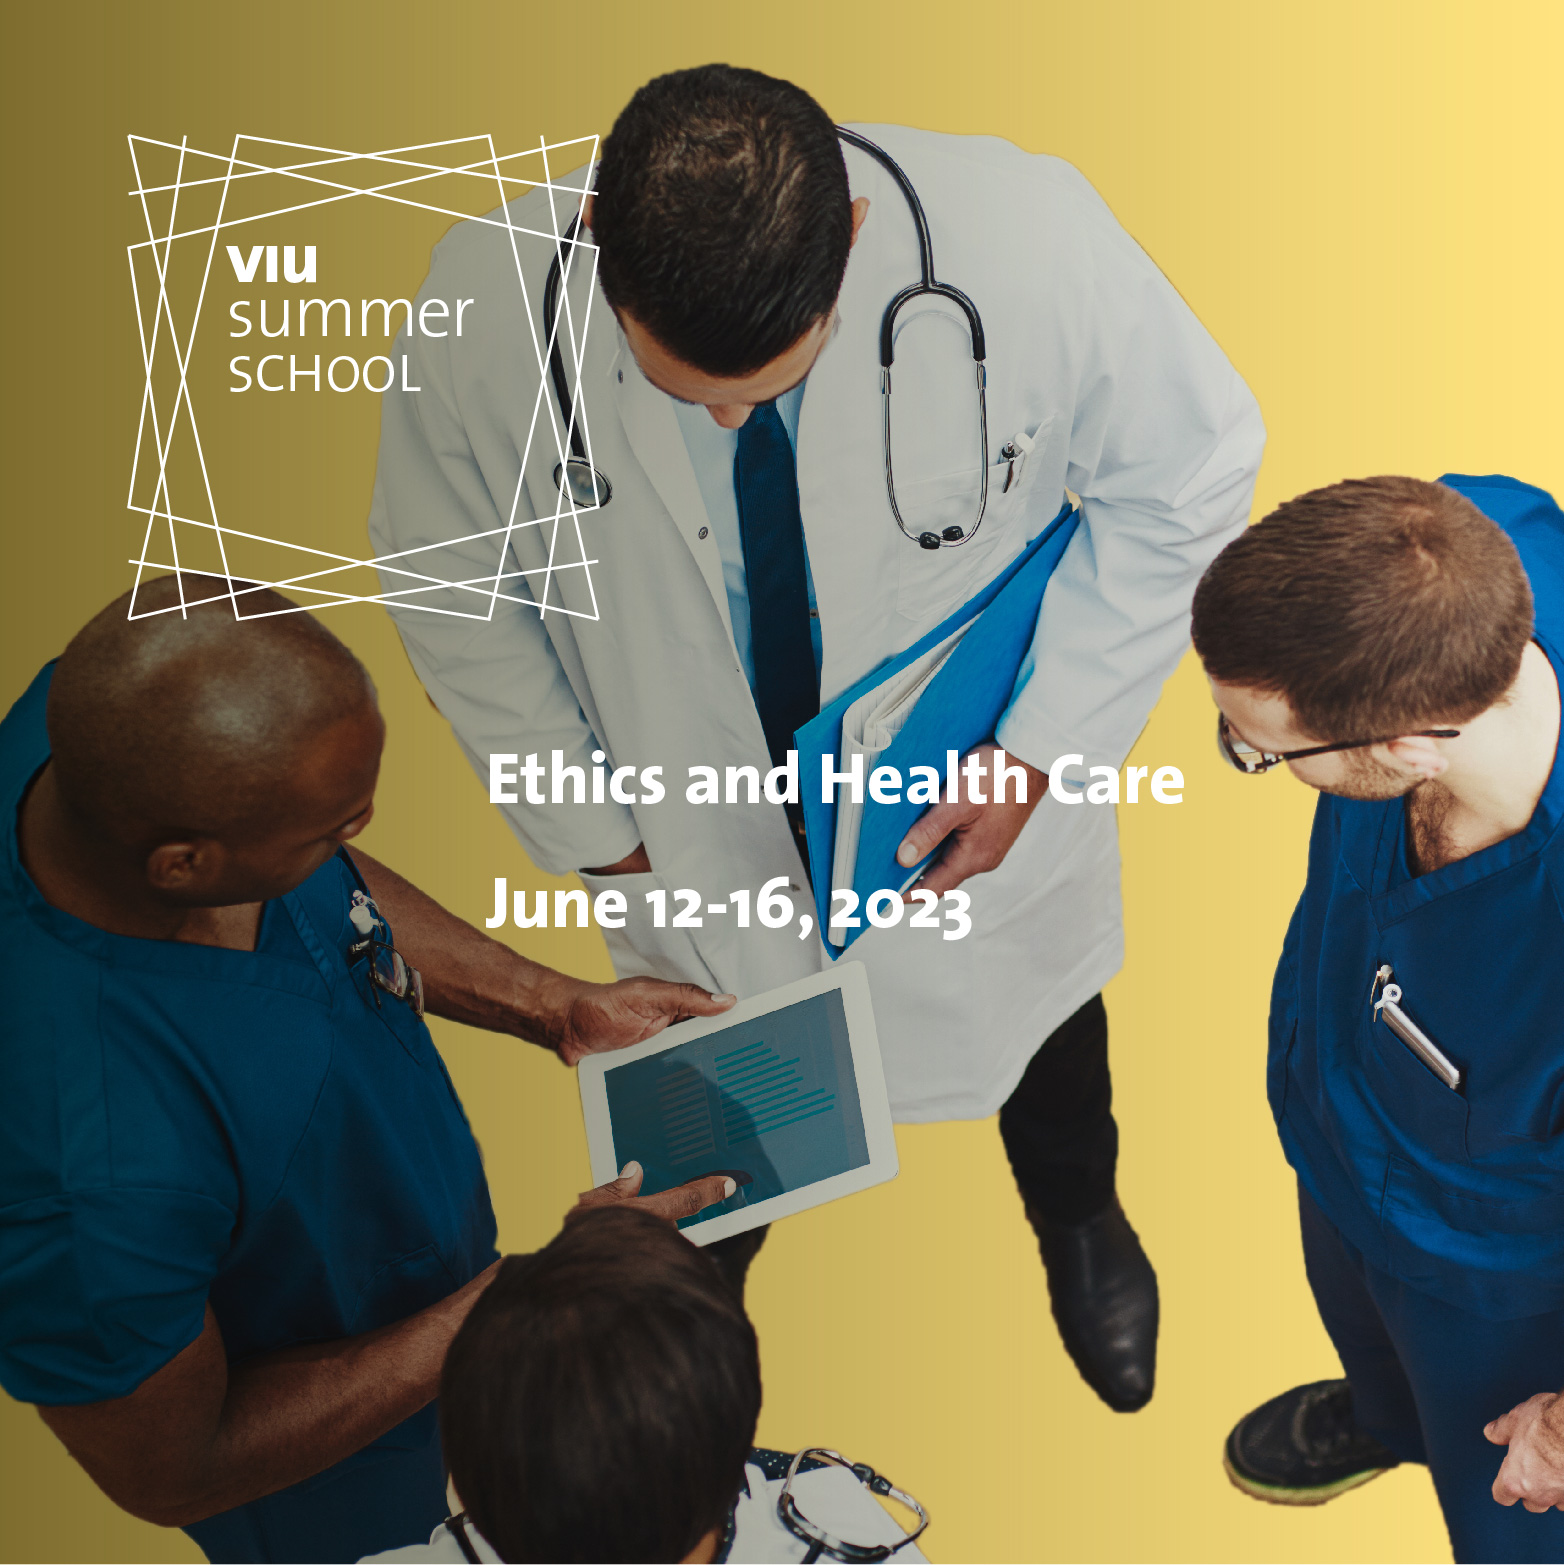 ethics and health care 2023